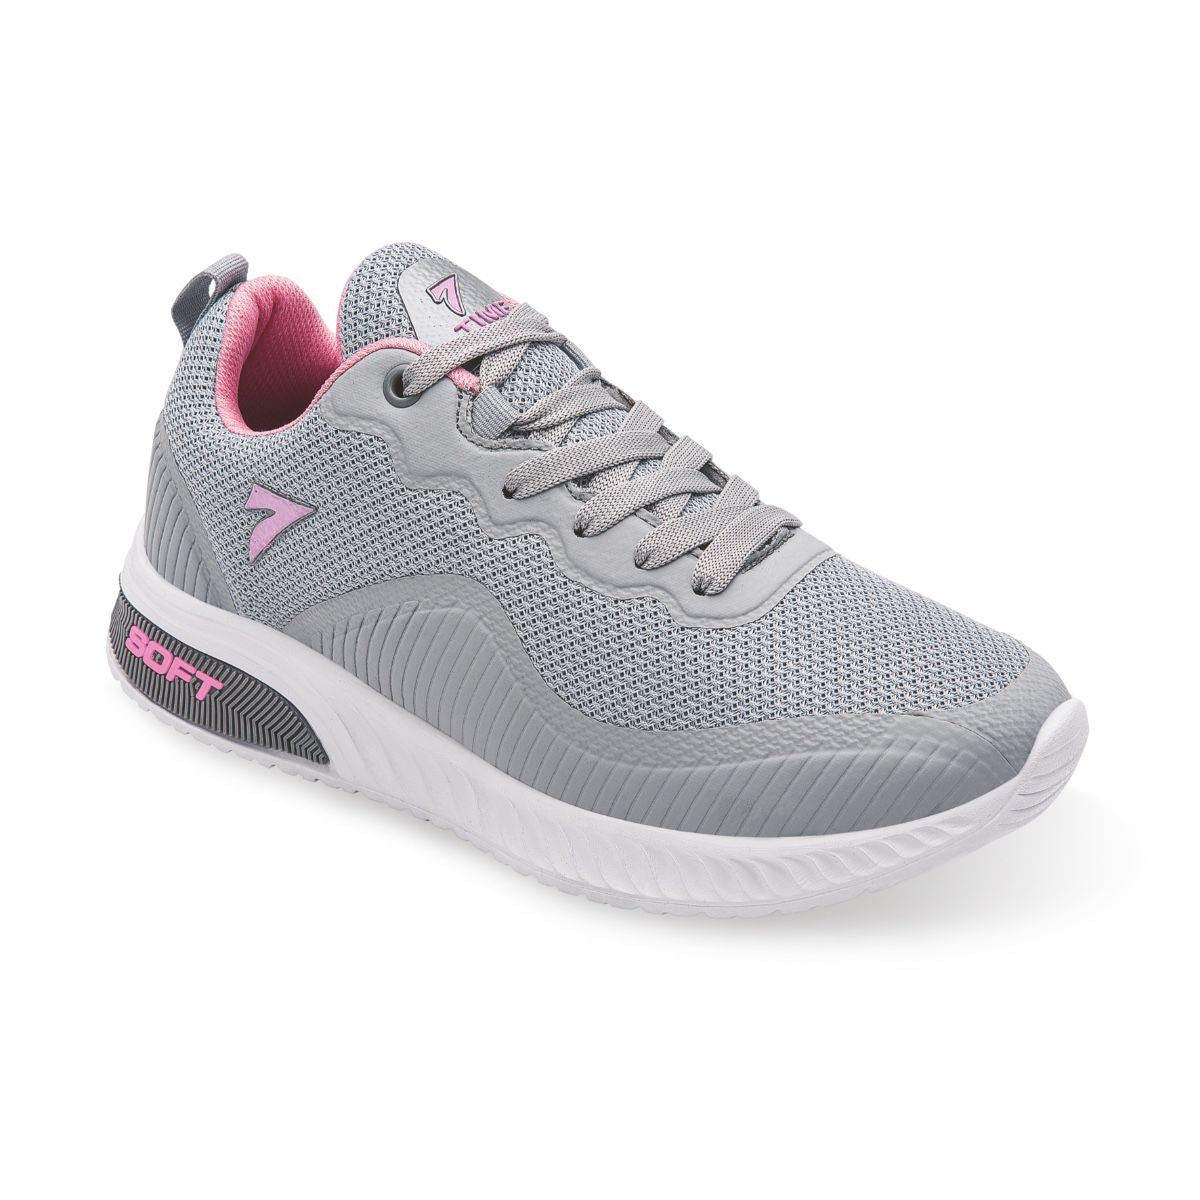 DEPORTIVO MUJER SPORT TIME 0236-6 GRIS/ROSA